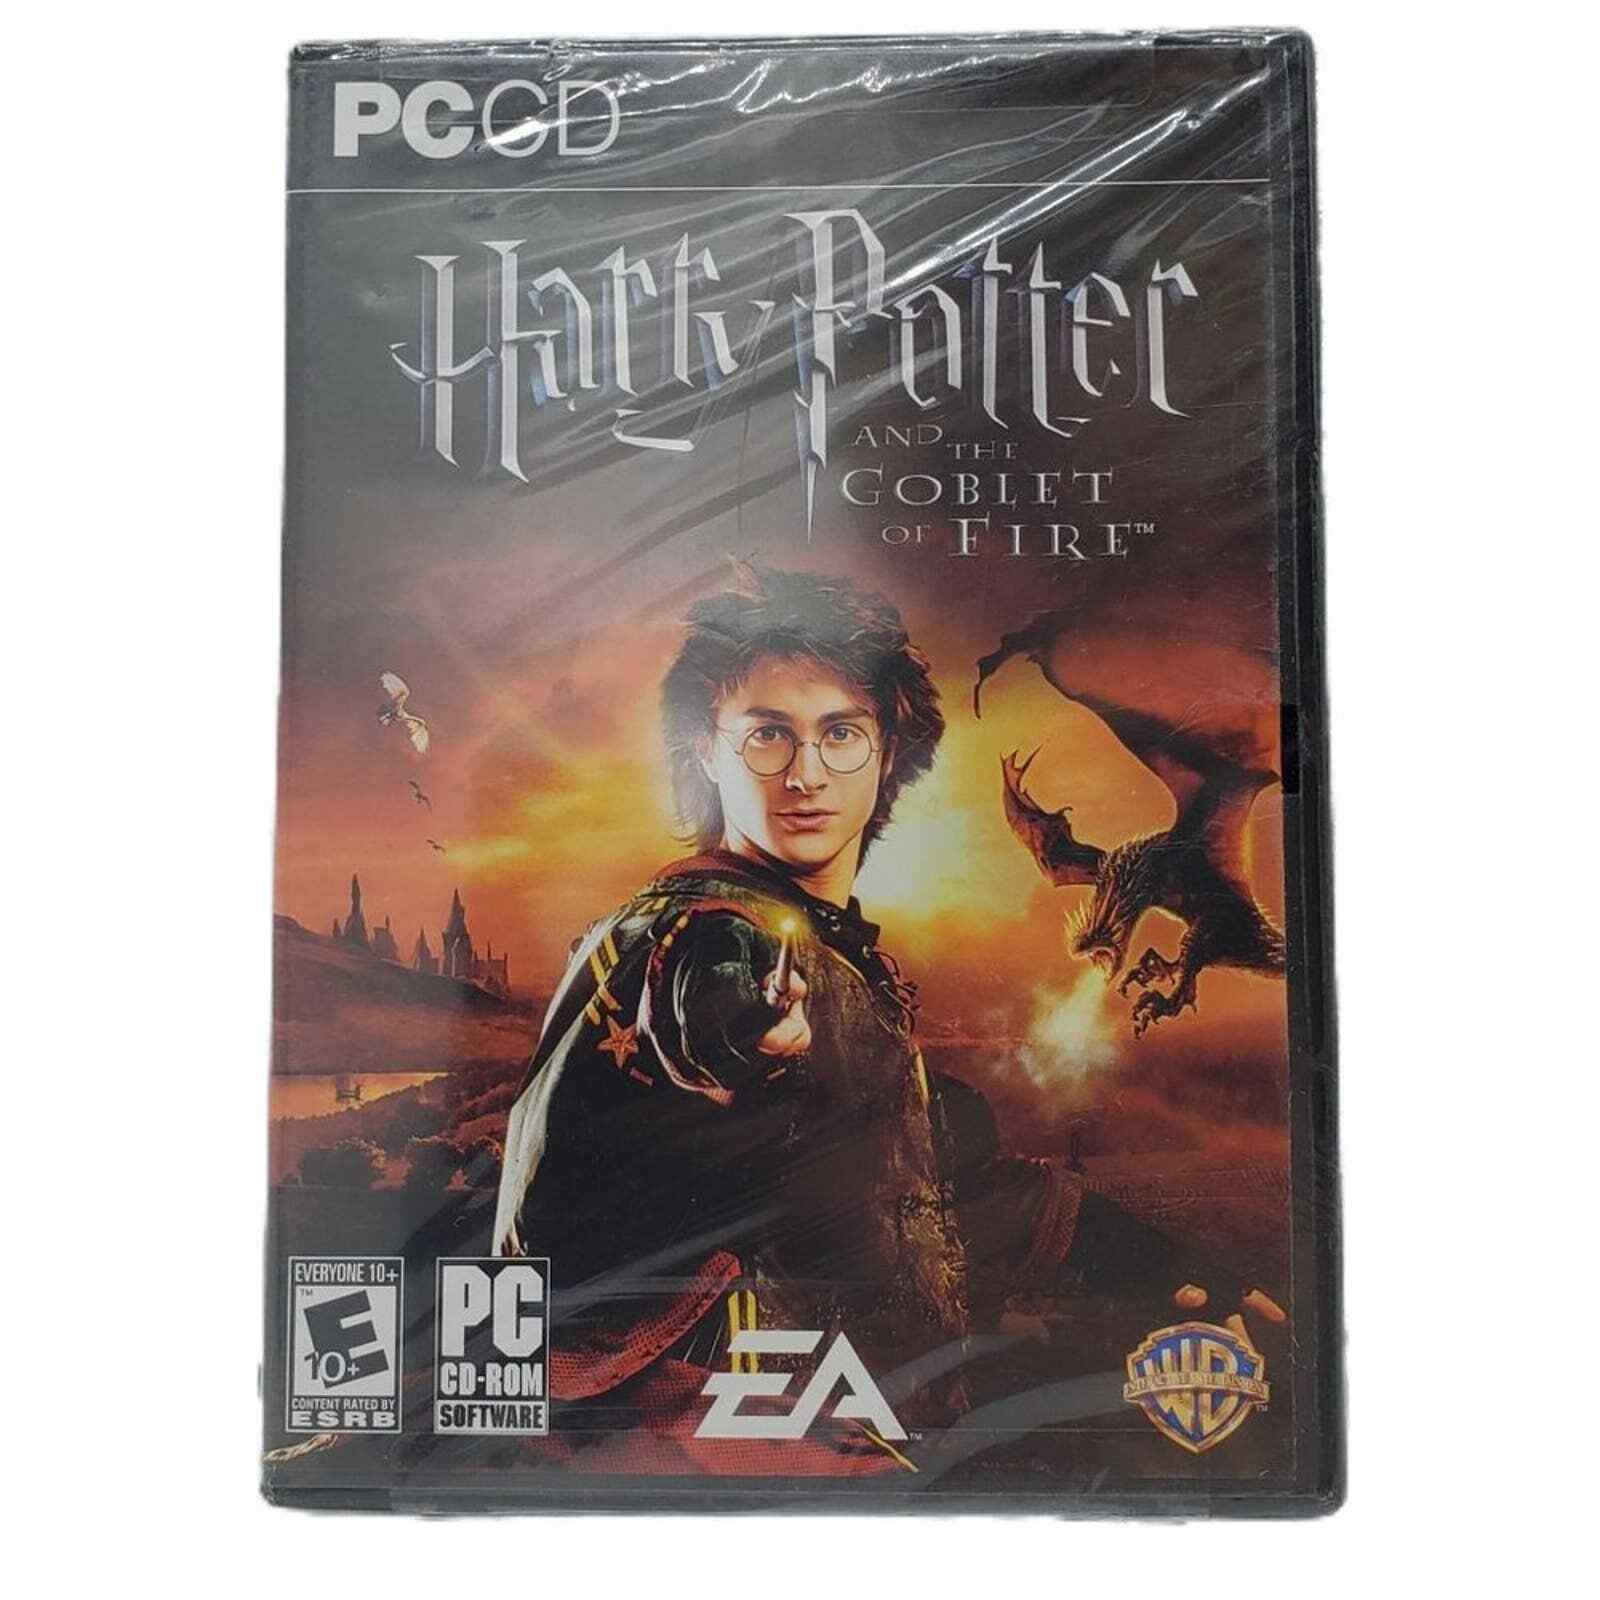 Vintage EA PC CD Harry Potter And The Goblet Of Fire Computer Game